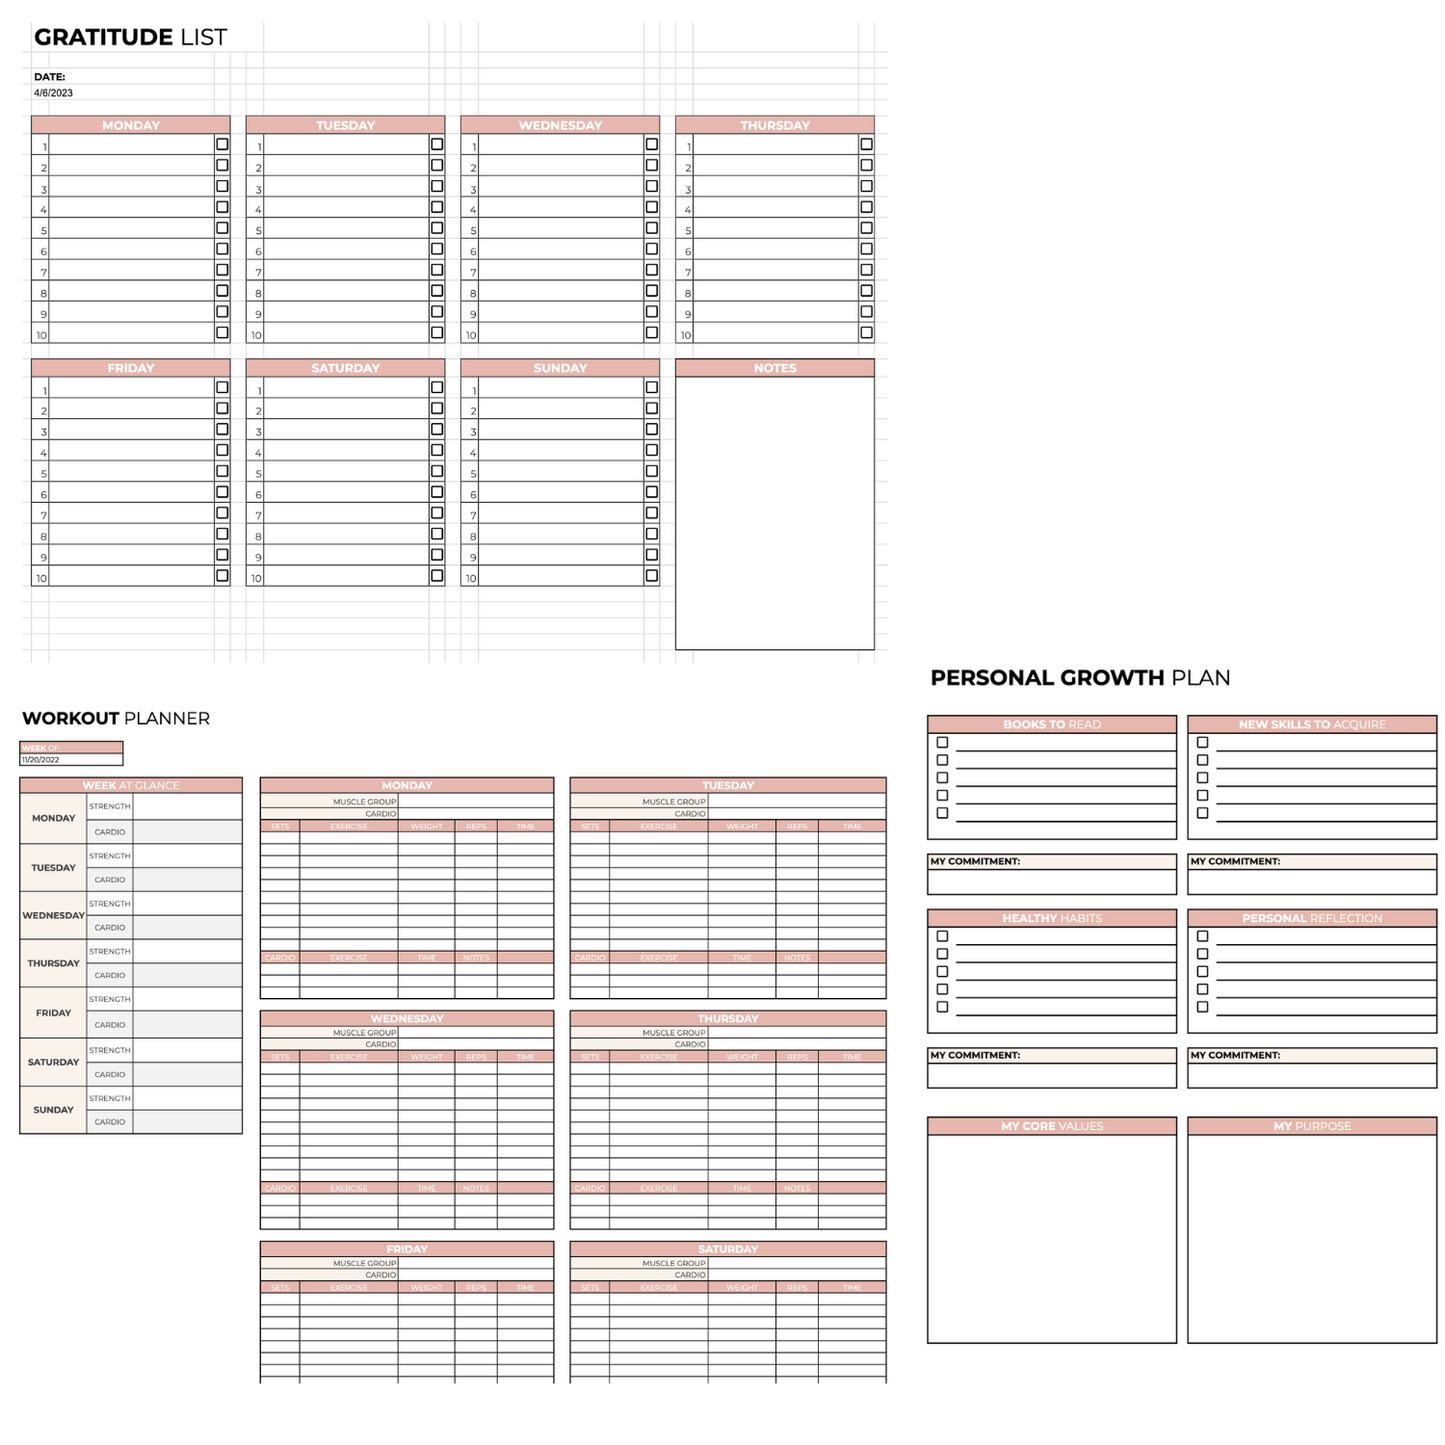 collage of 3 of the spreadsheets - the gratitude list, workout planner, and personal growth planner